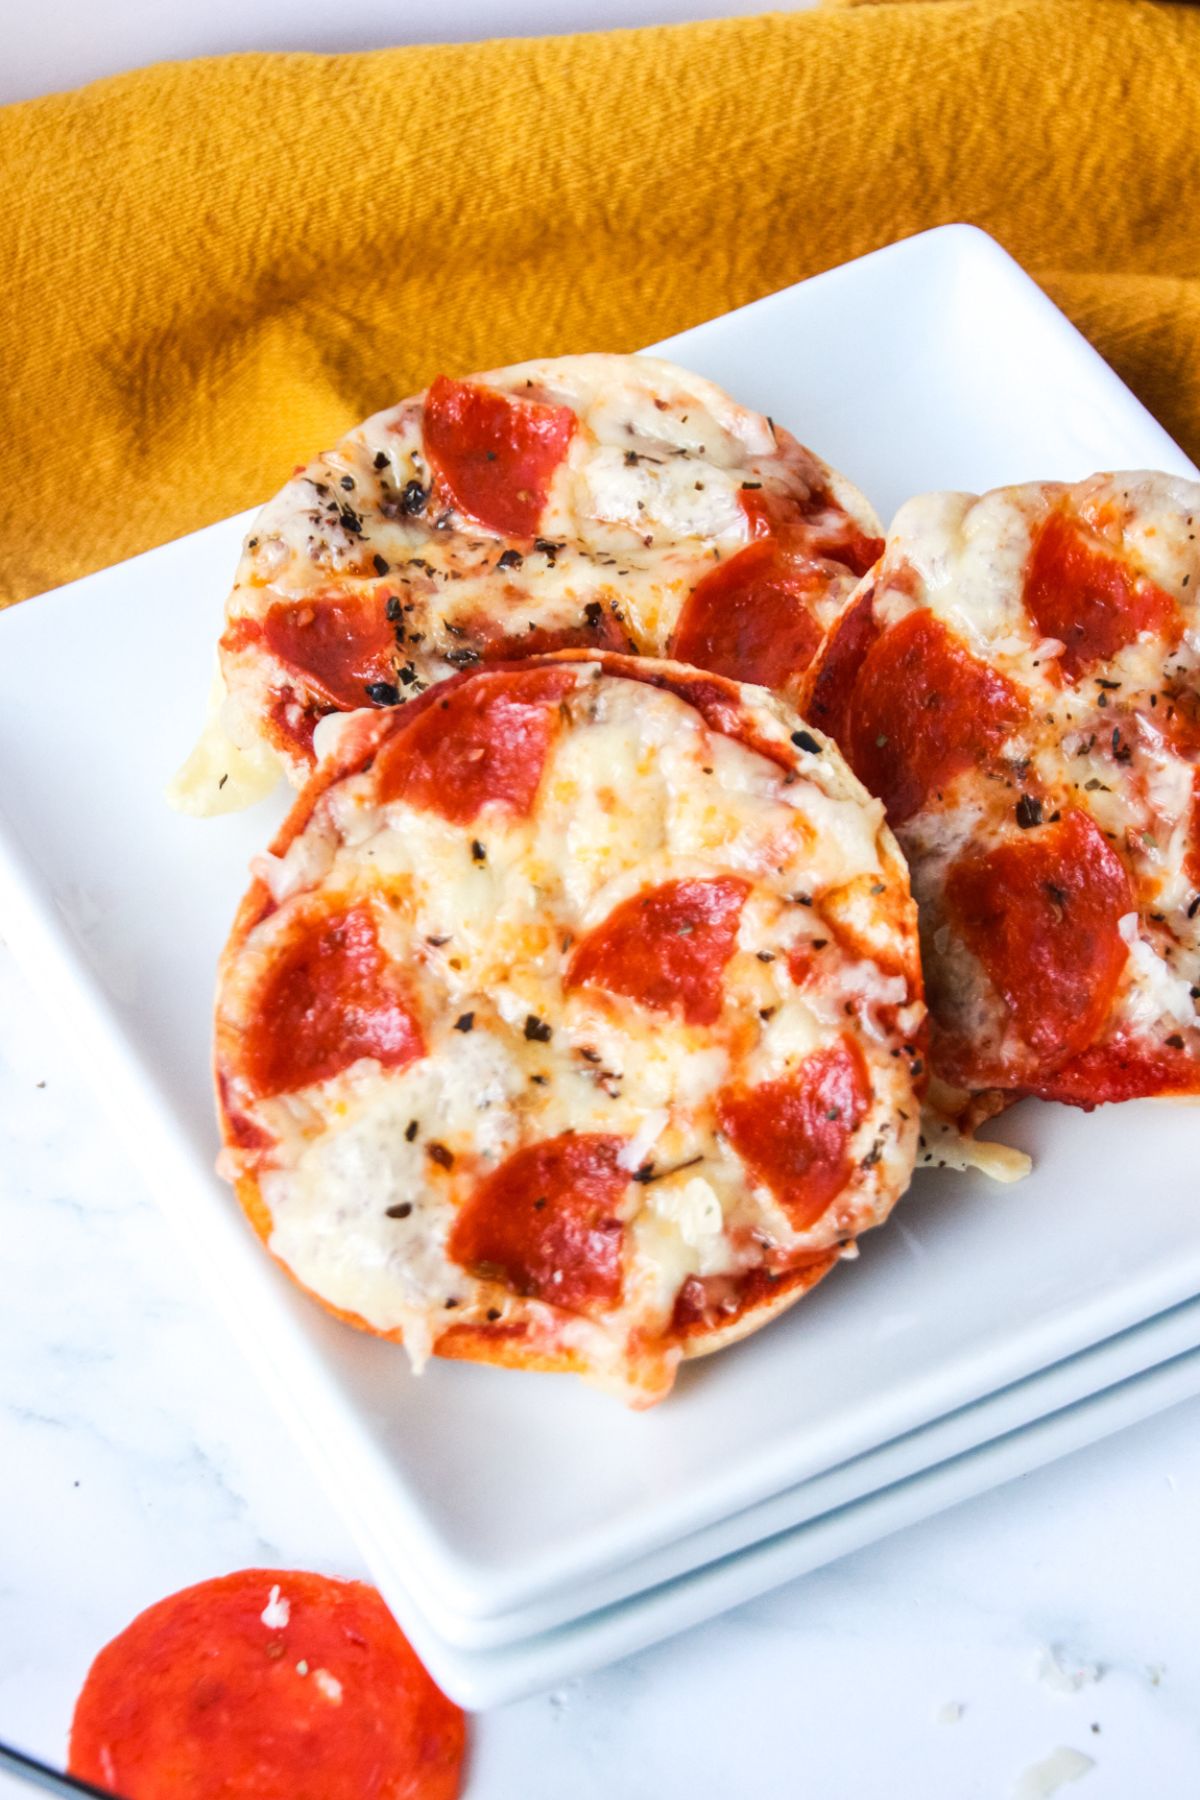 A few homemade Bagel Bite Pizzas on a plate.